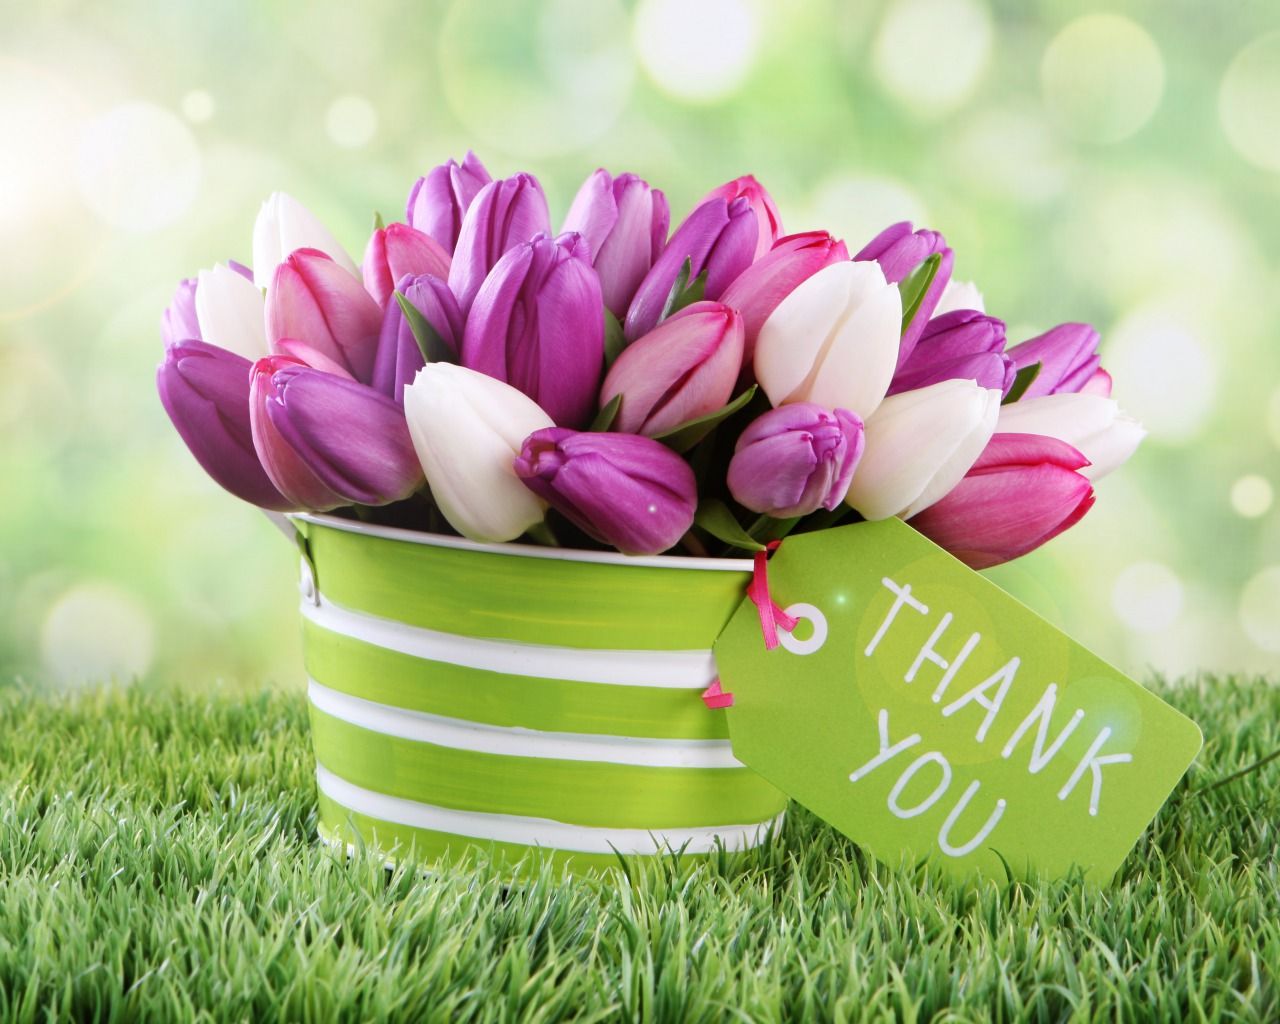 Thank You With flower HD Image Wallpaper free pics